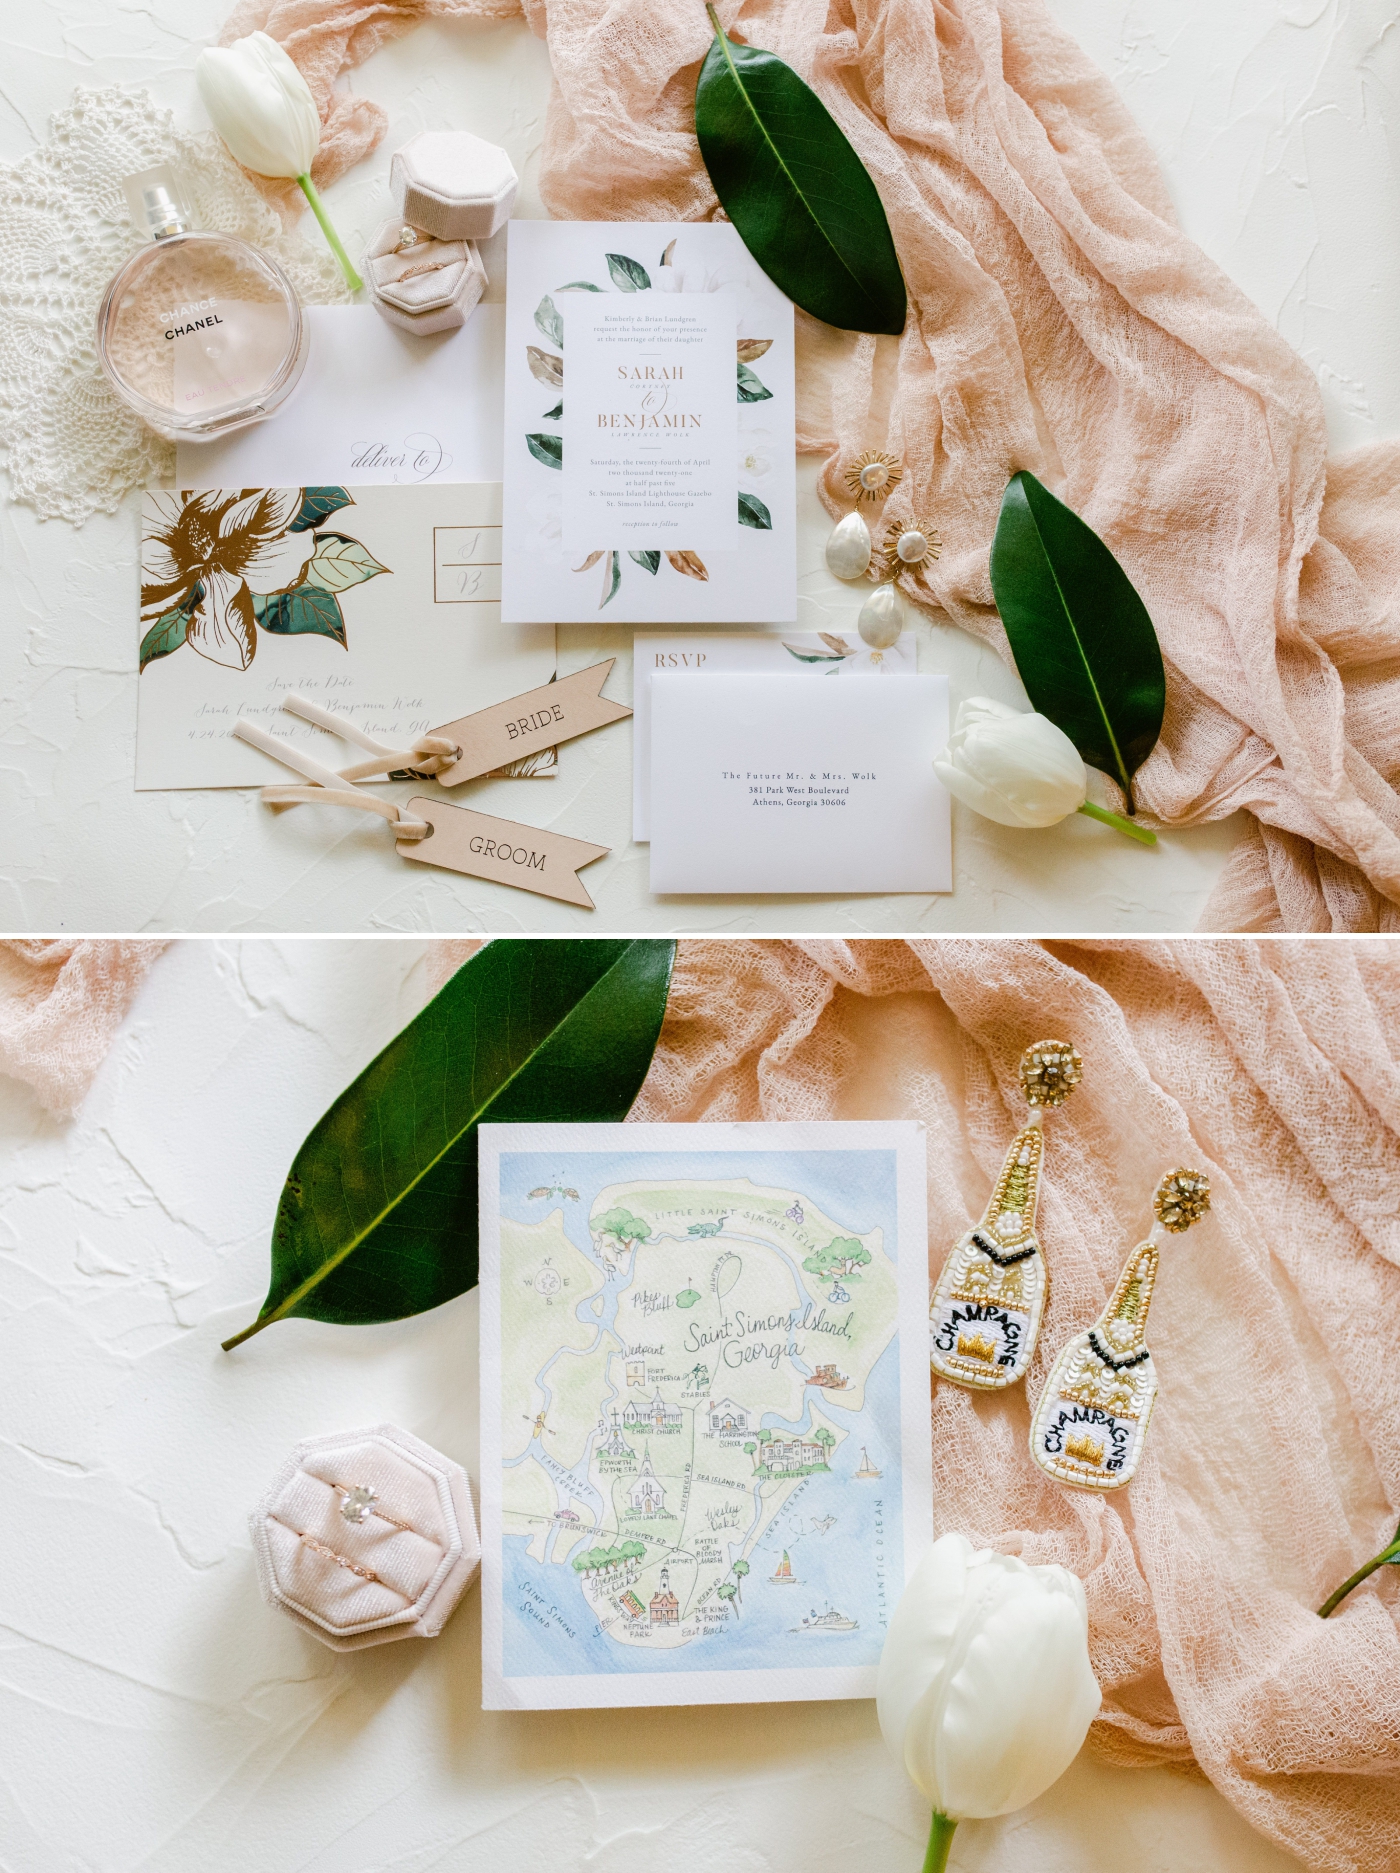 Magnolia wedding invitations from The Knot